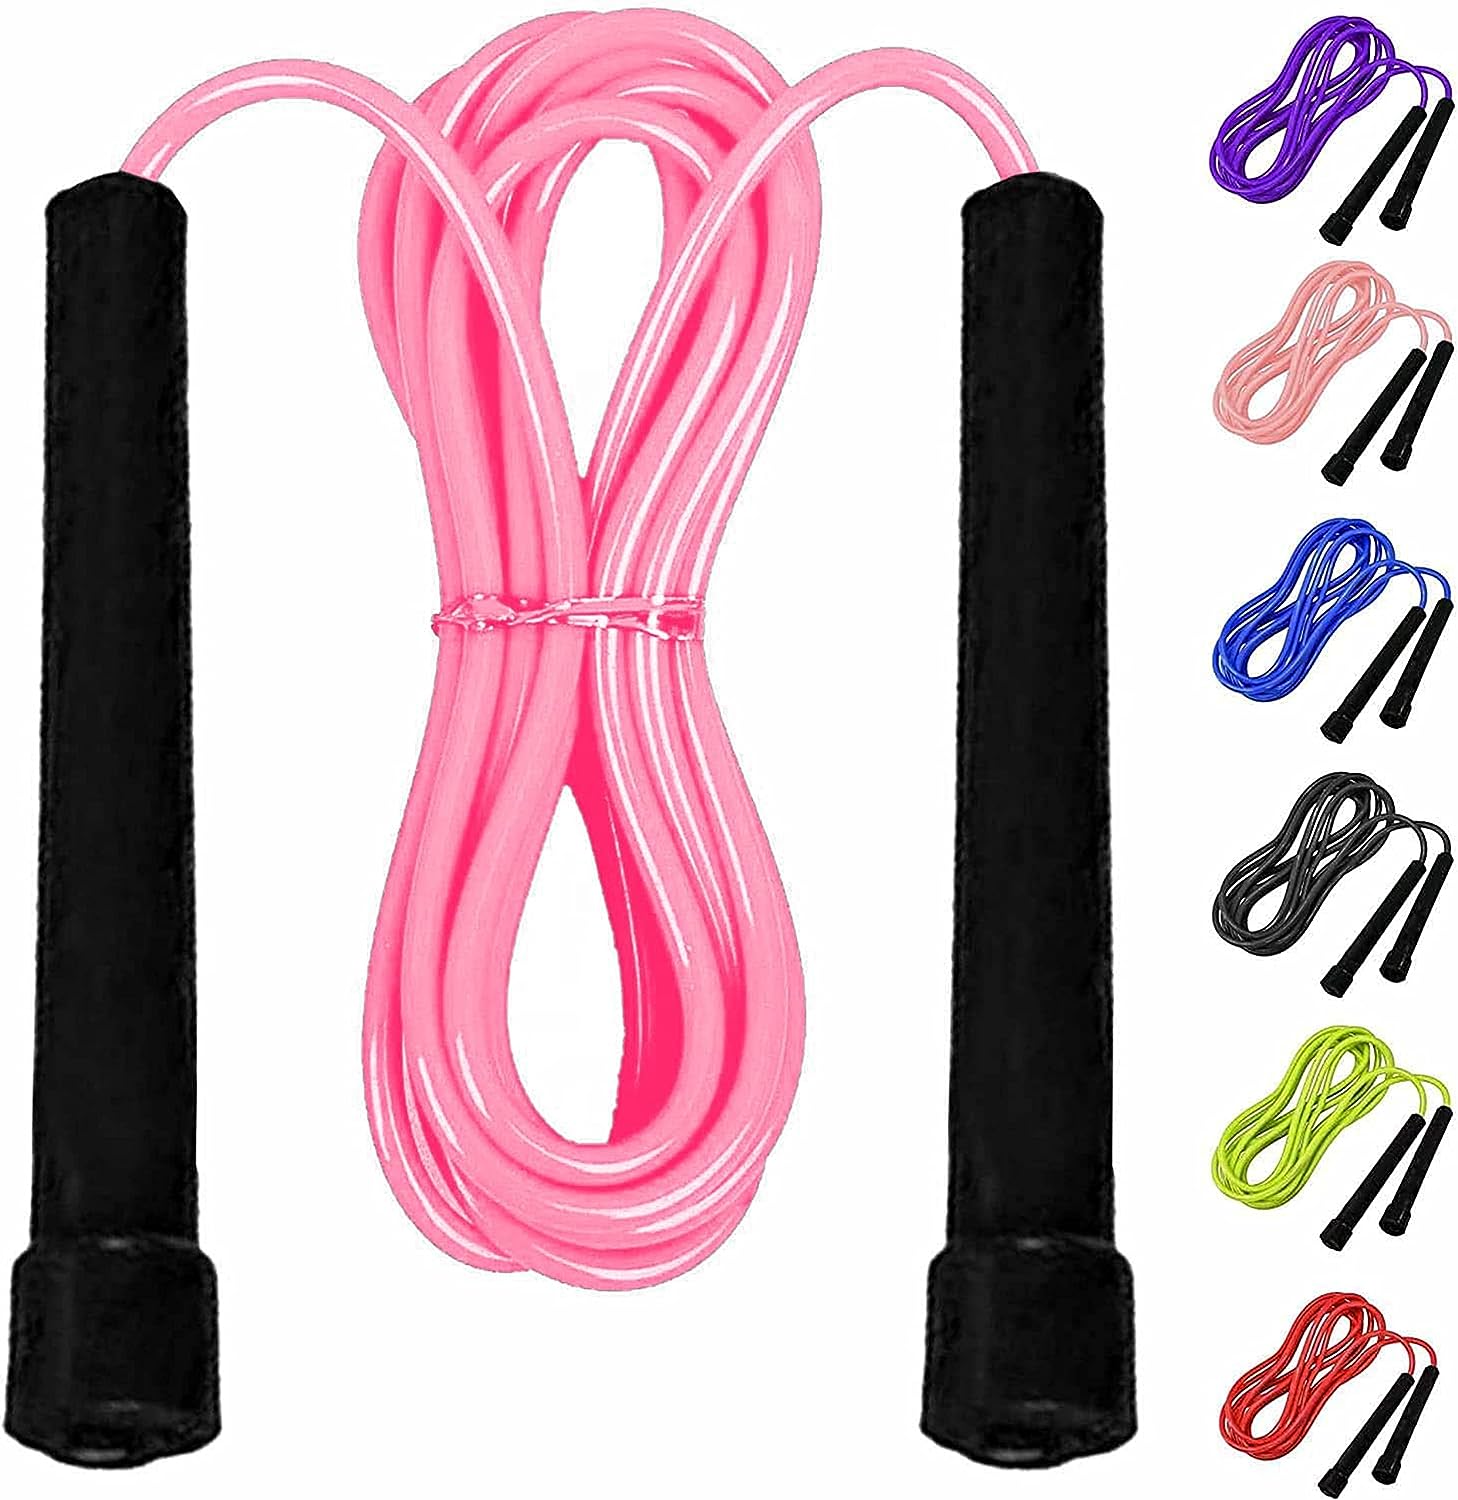 Skipping Rope Adult Fitness Jump Rope Gym Workouts  outdoor Training for Fat Burning Boxing, MMA Exercises Speed Fitness Weighted Skipping Ropes for Women  Men